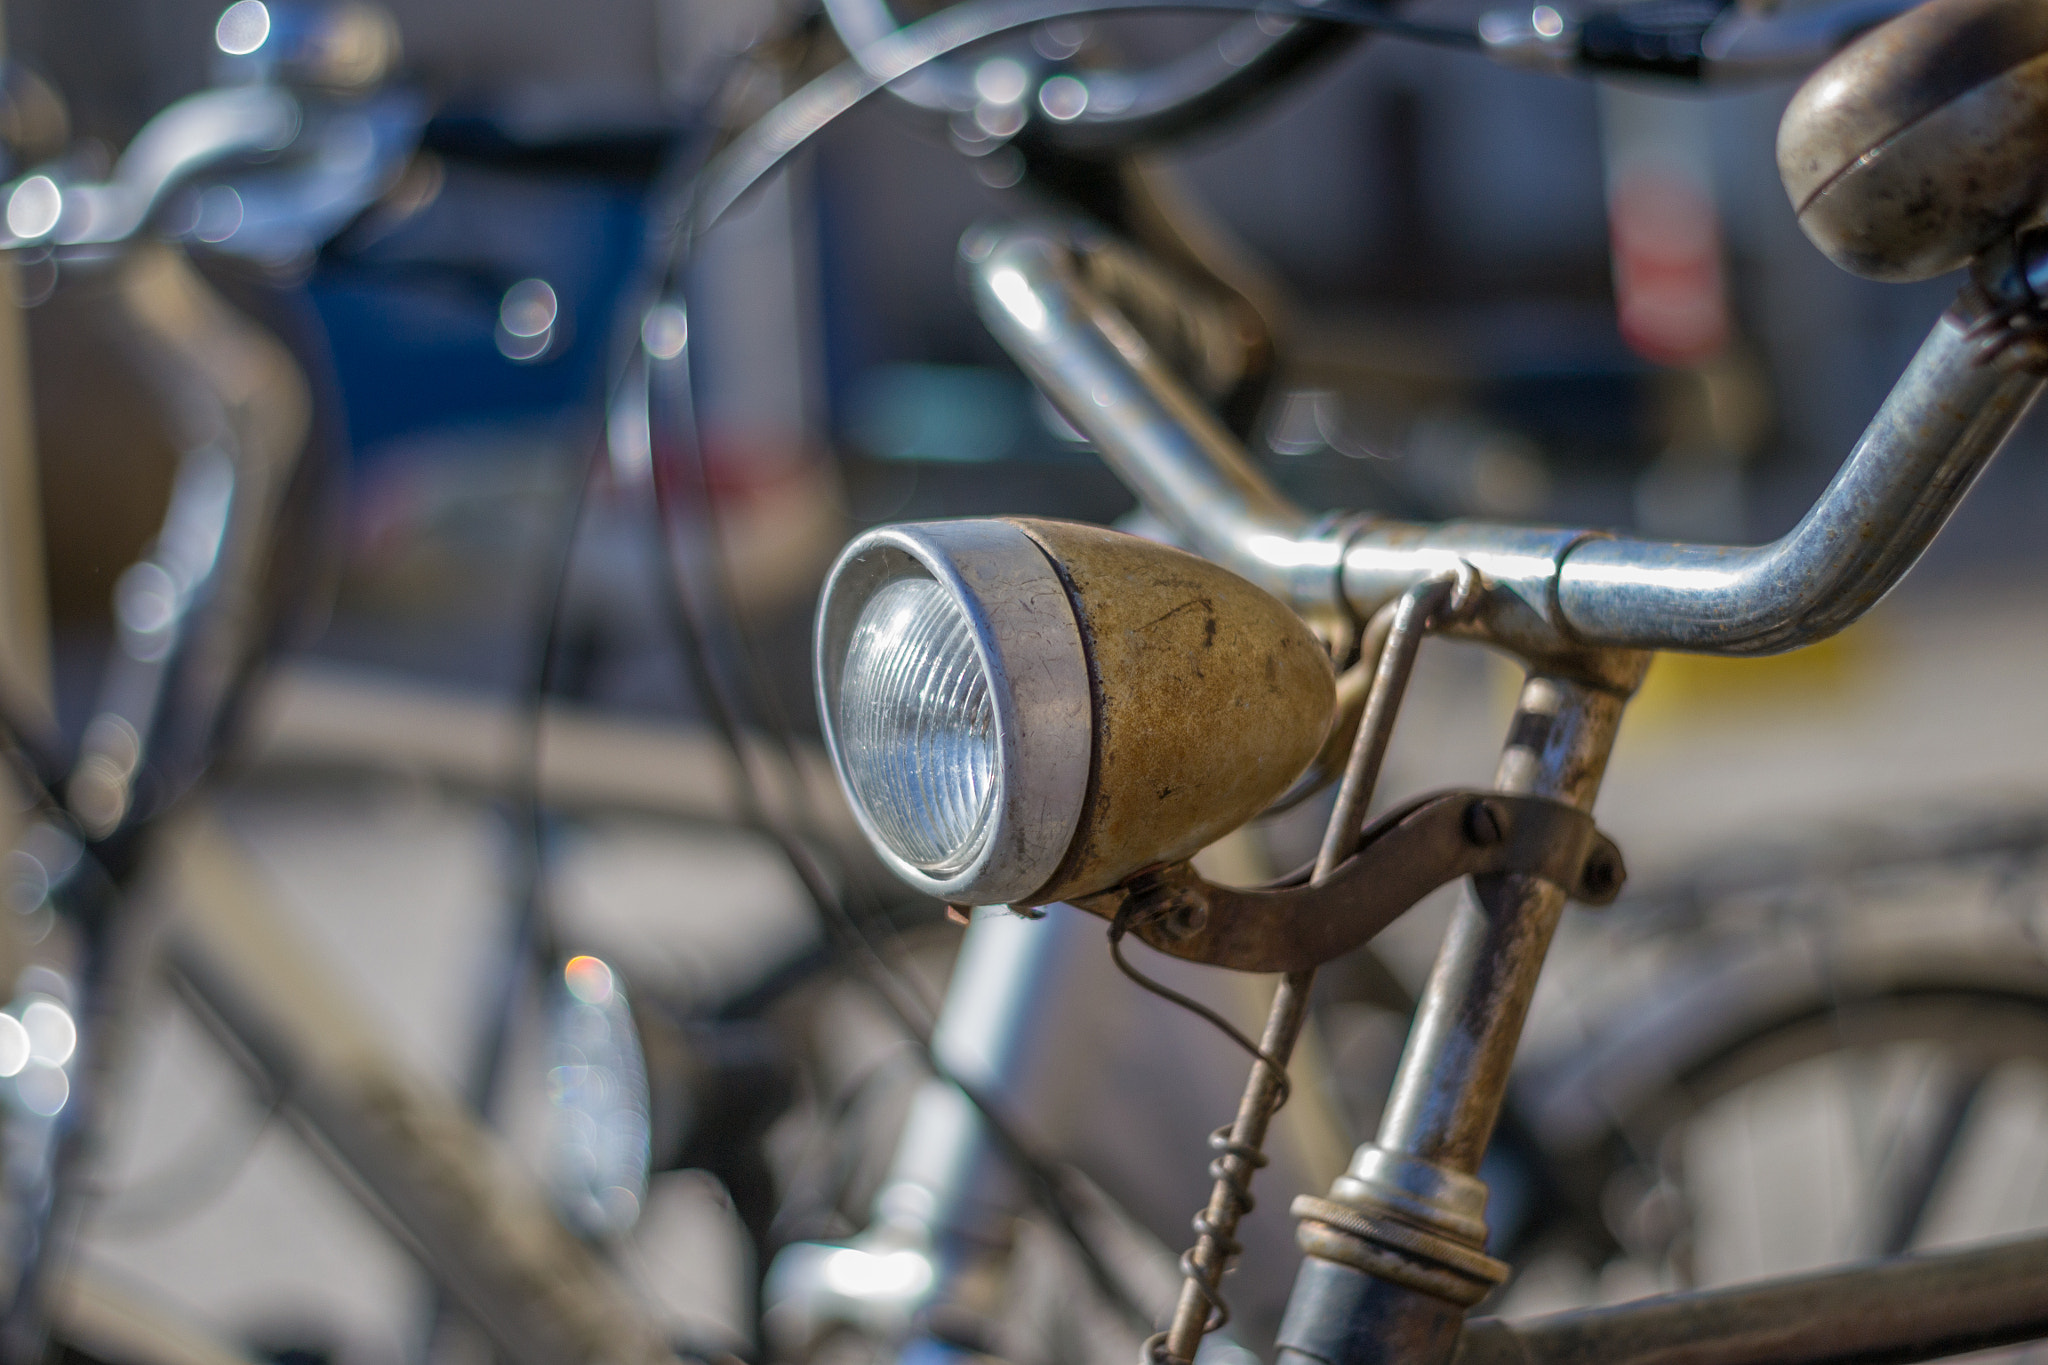 Nikon D3100 + AF-S DX VR Zoom-Nikkor 18-55mm f/3.5-5.6G + 2.8x sample photo. Bicycle lamp photography